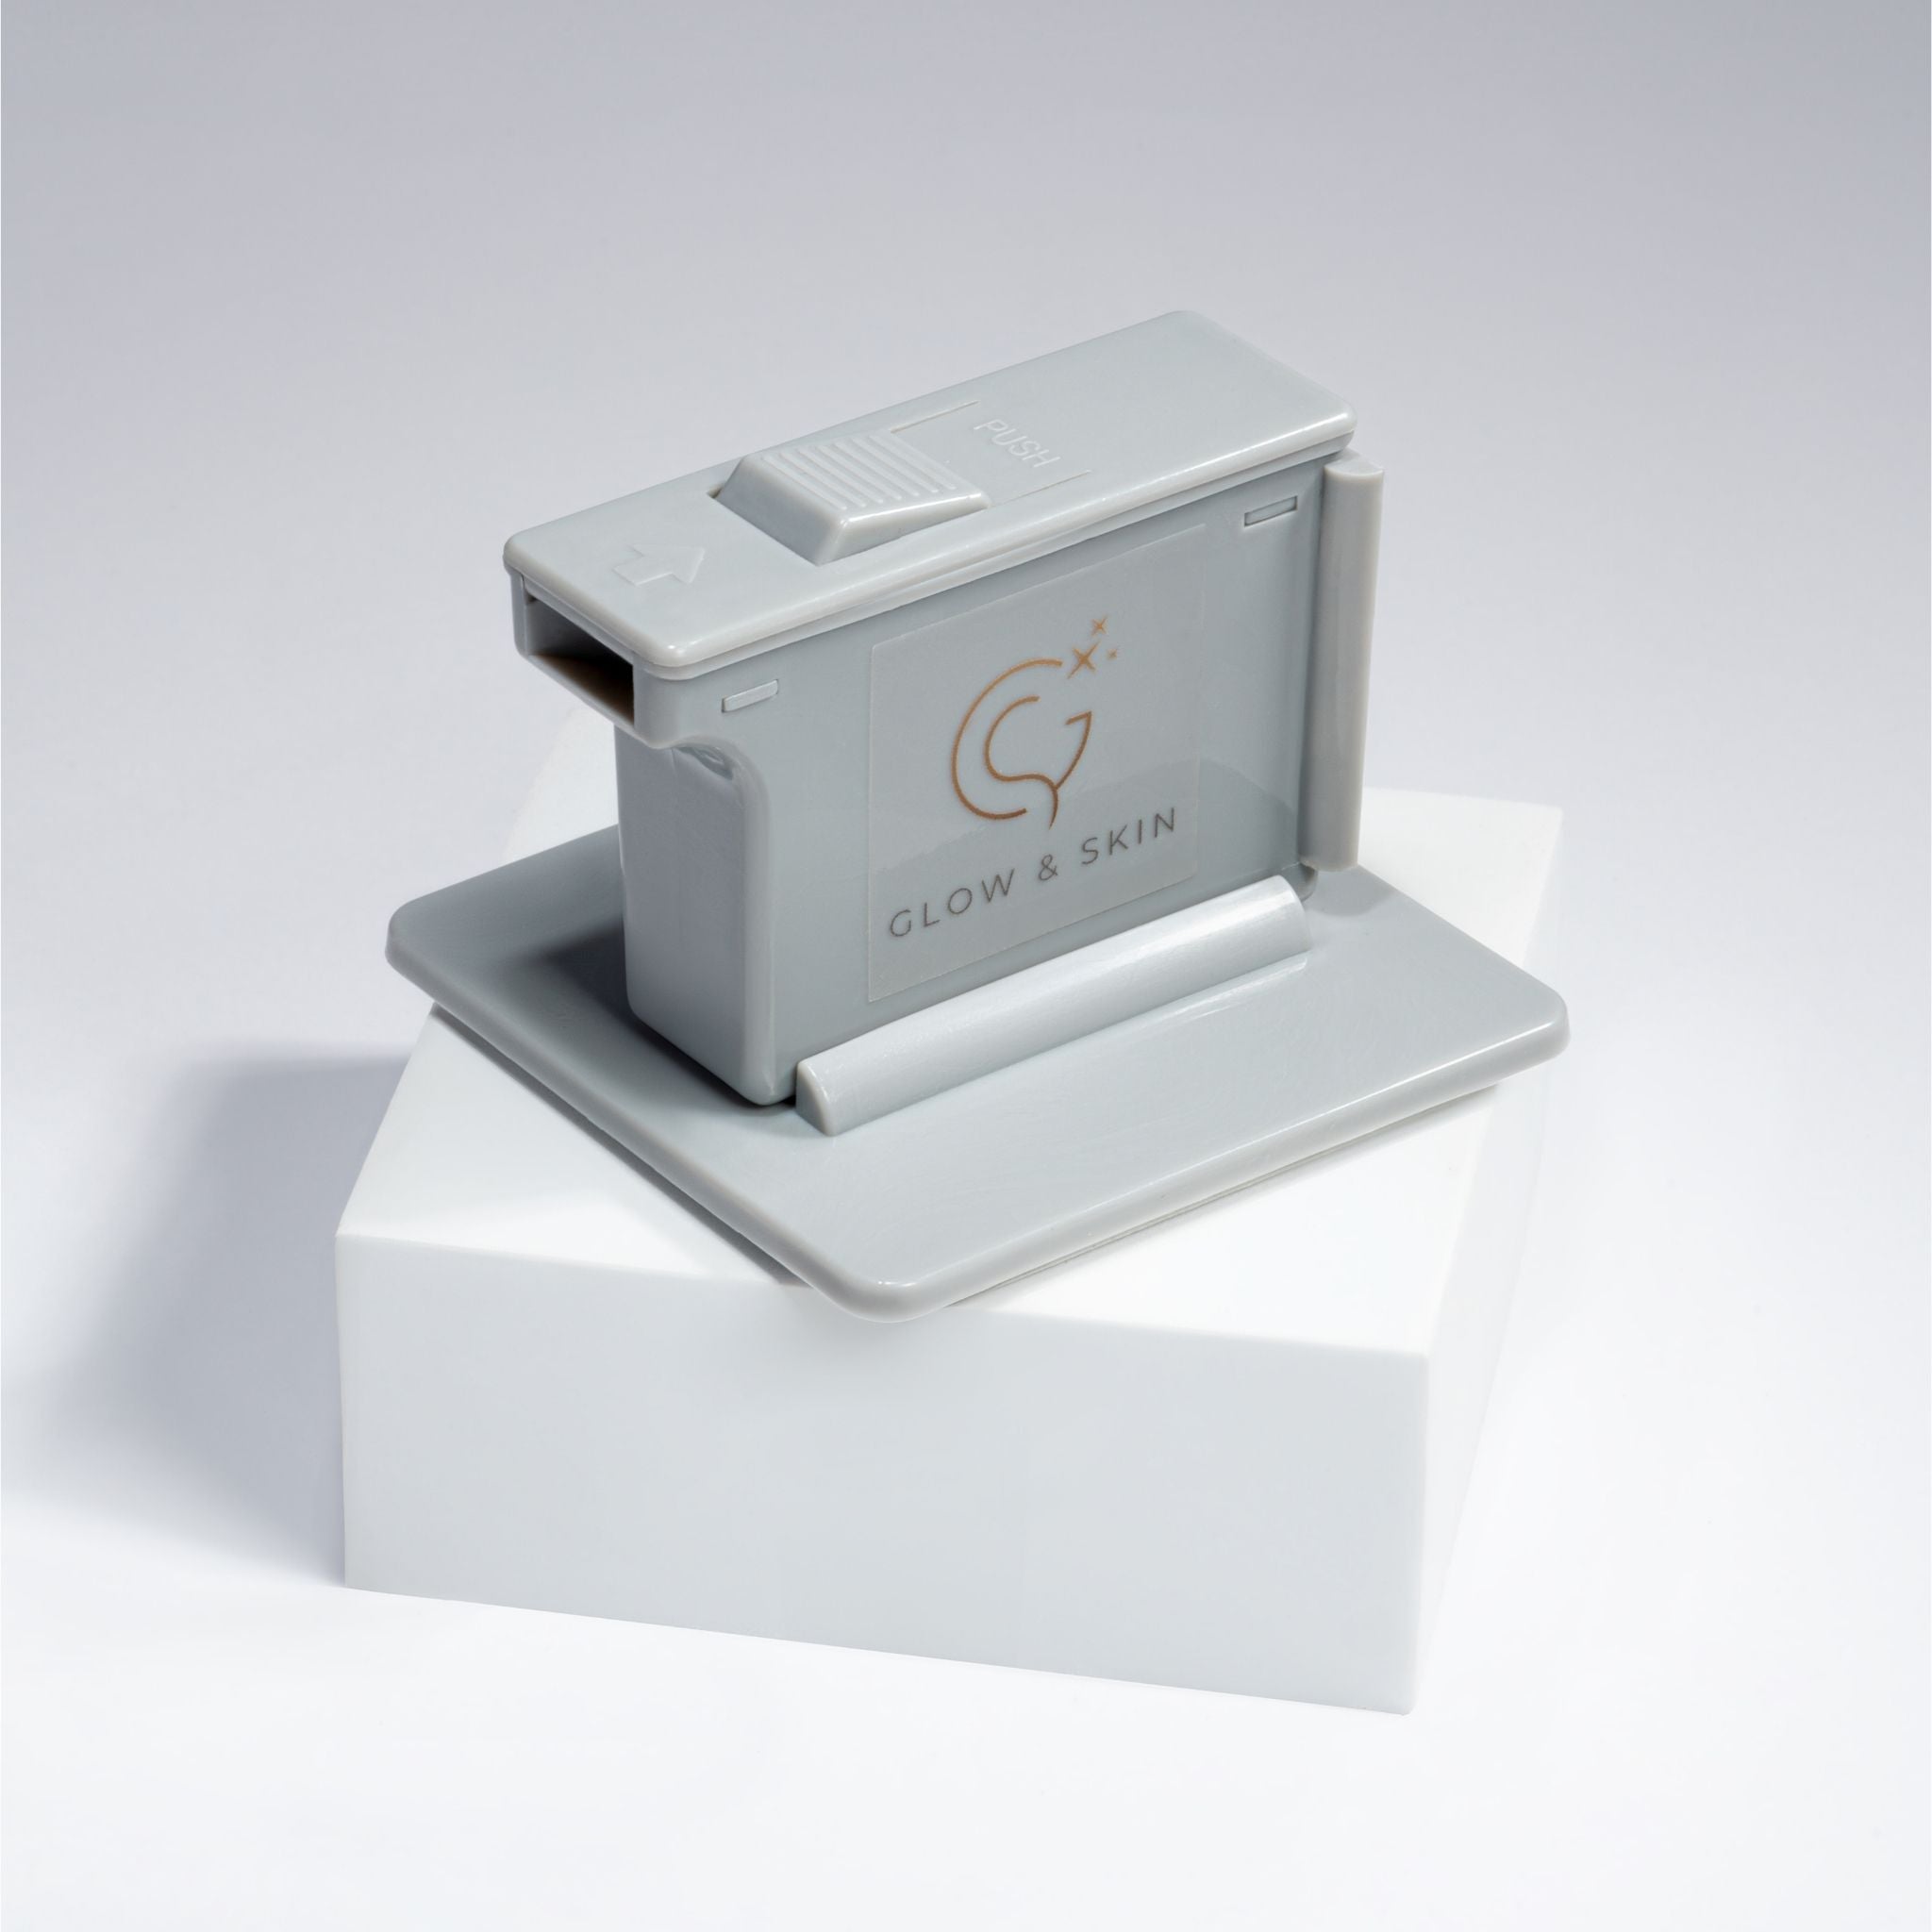 Safe dermaplaning blade remover box for easy, hygienic disposal